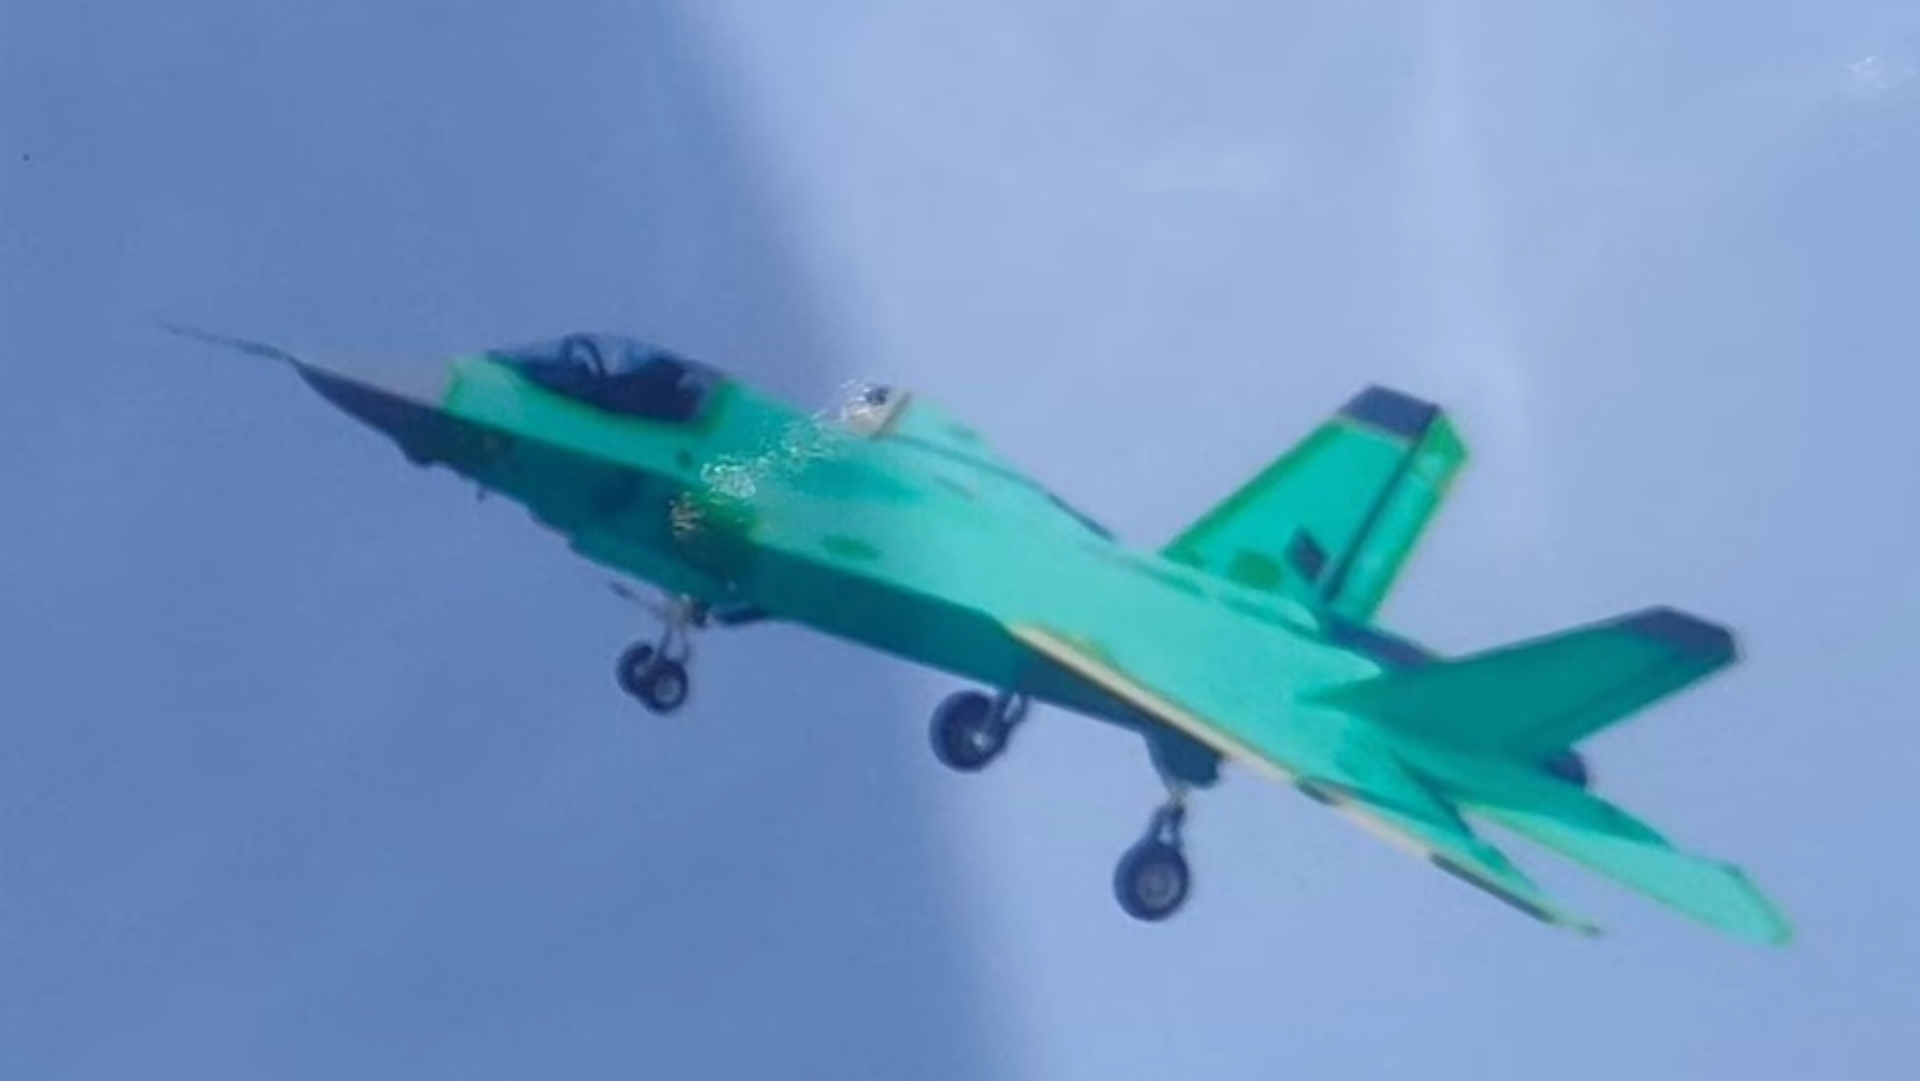 A photo of an aircraft closely based on the Shenyang FC-31 that has been modified for carrier flight ops. The FC-31 has long been speculated to be the basis for China's forthcoming fifth-generation carrier-based fighter. - Sputnik International, 1920, 30.10.2021